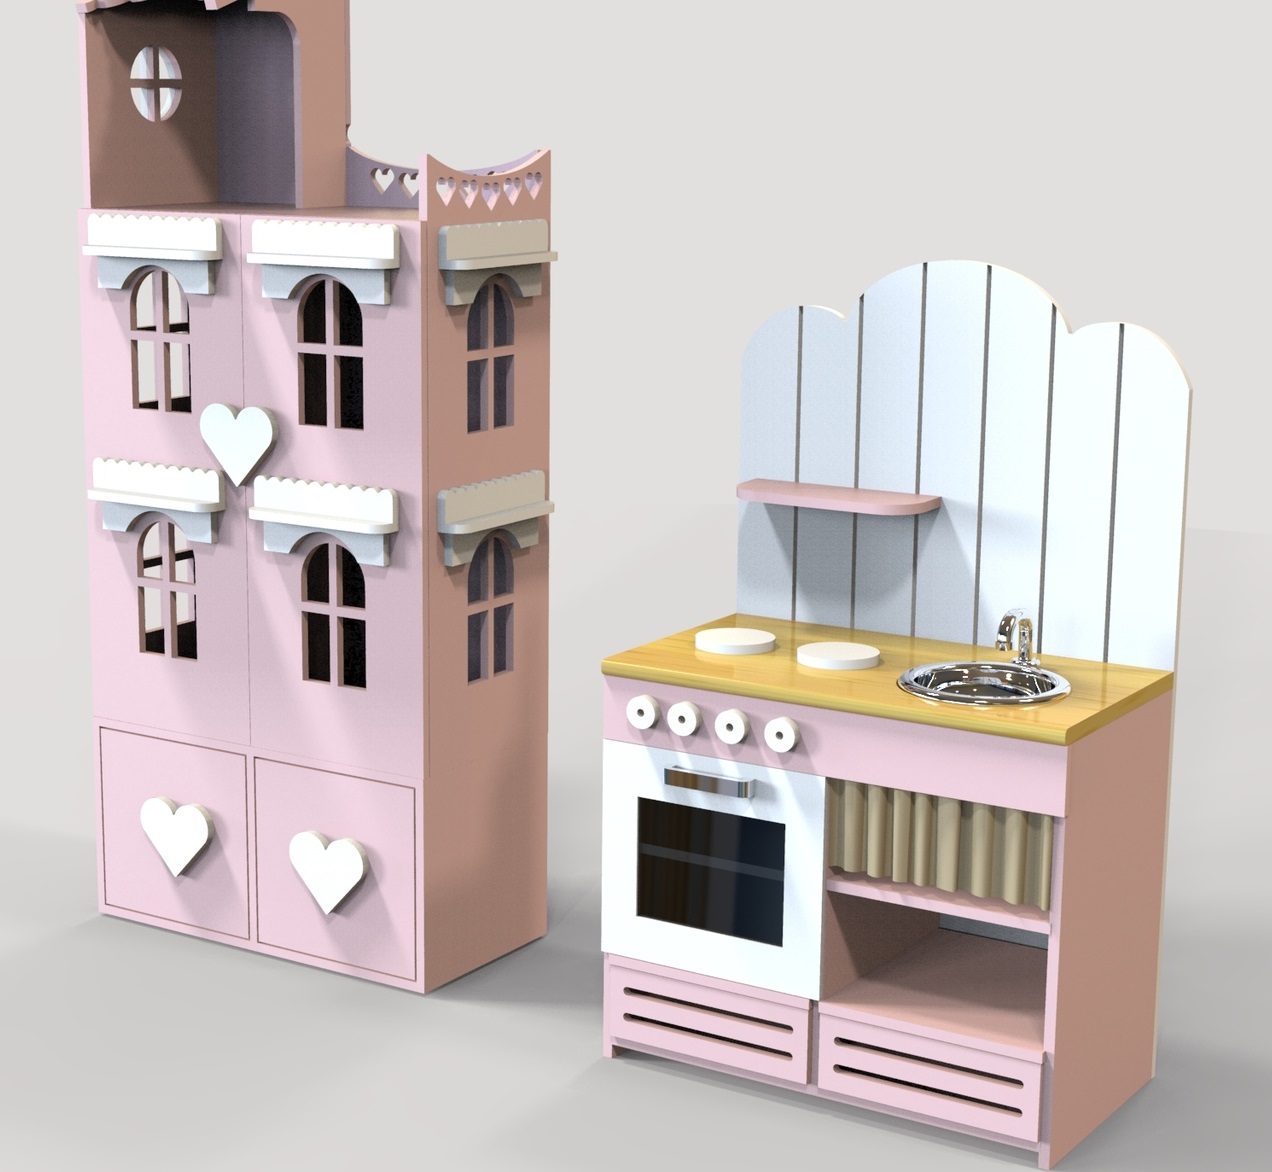 Laser Cut Doll House And Miniature Kitchen Free Vector